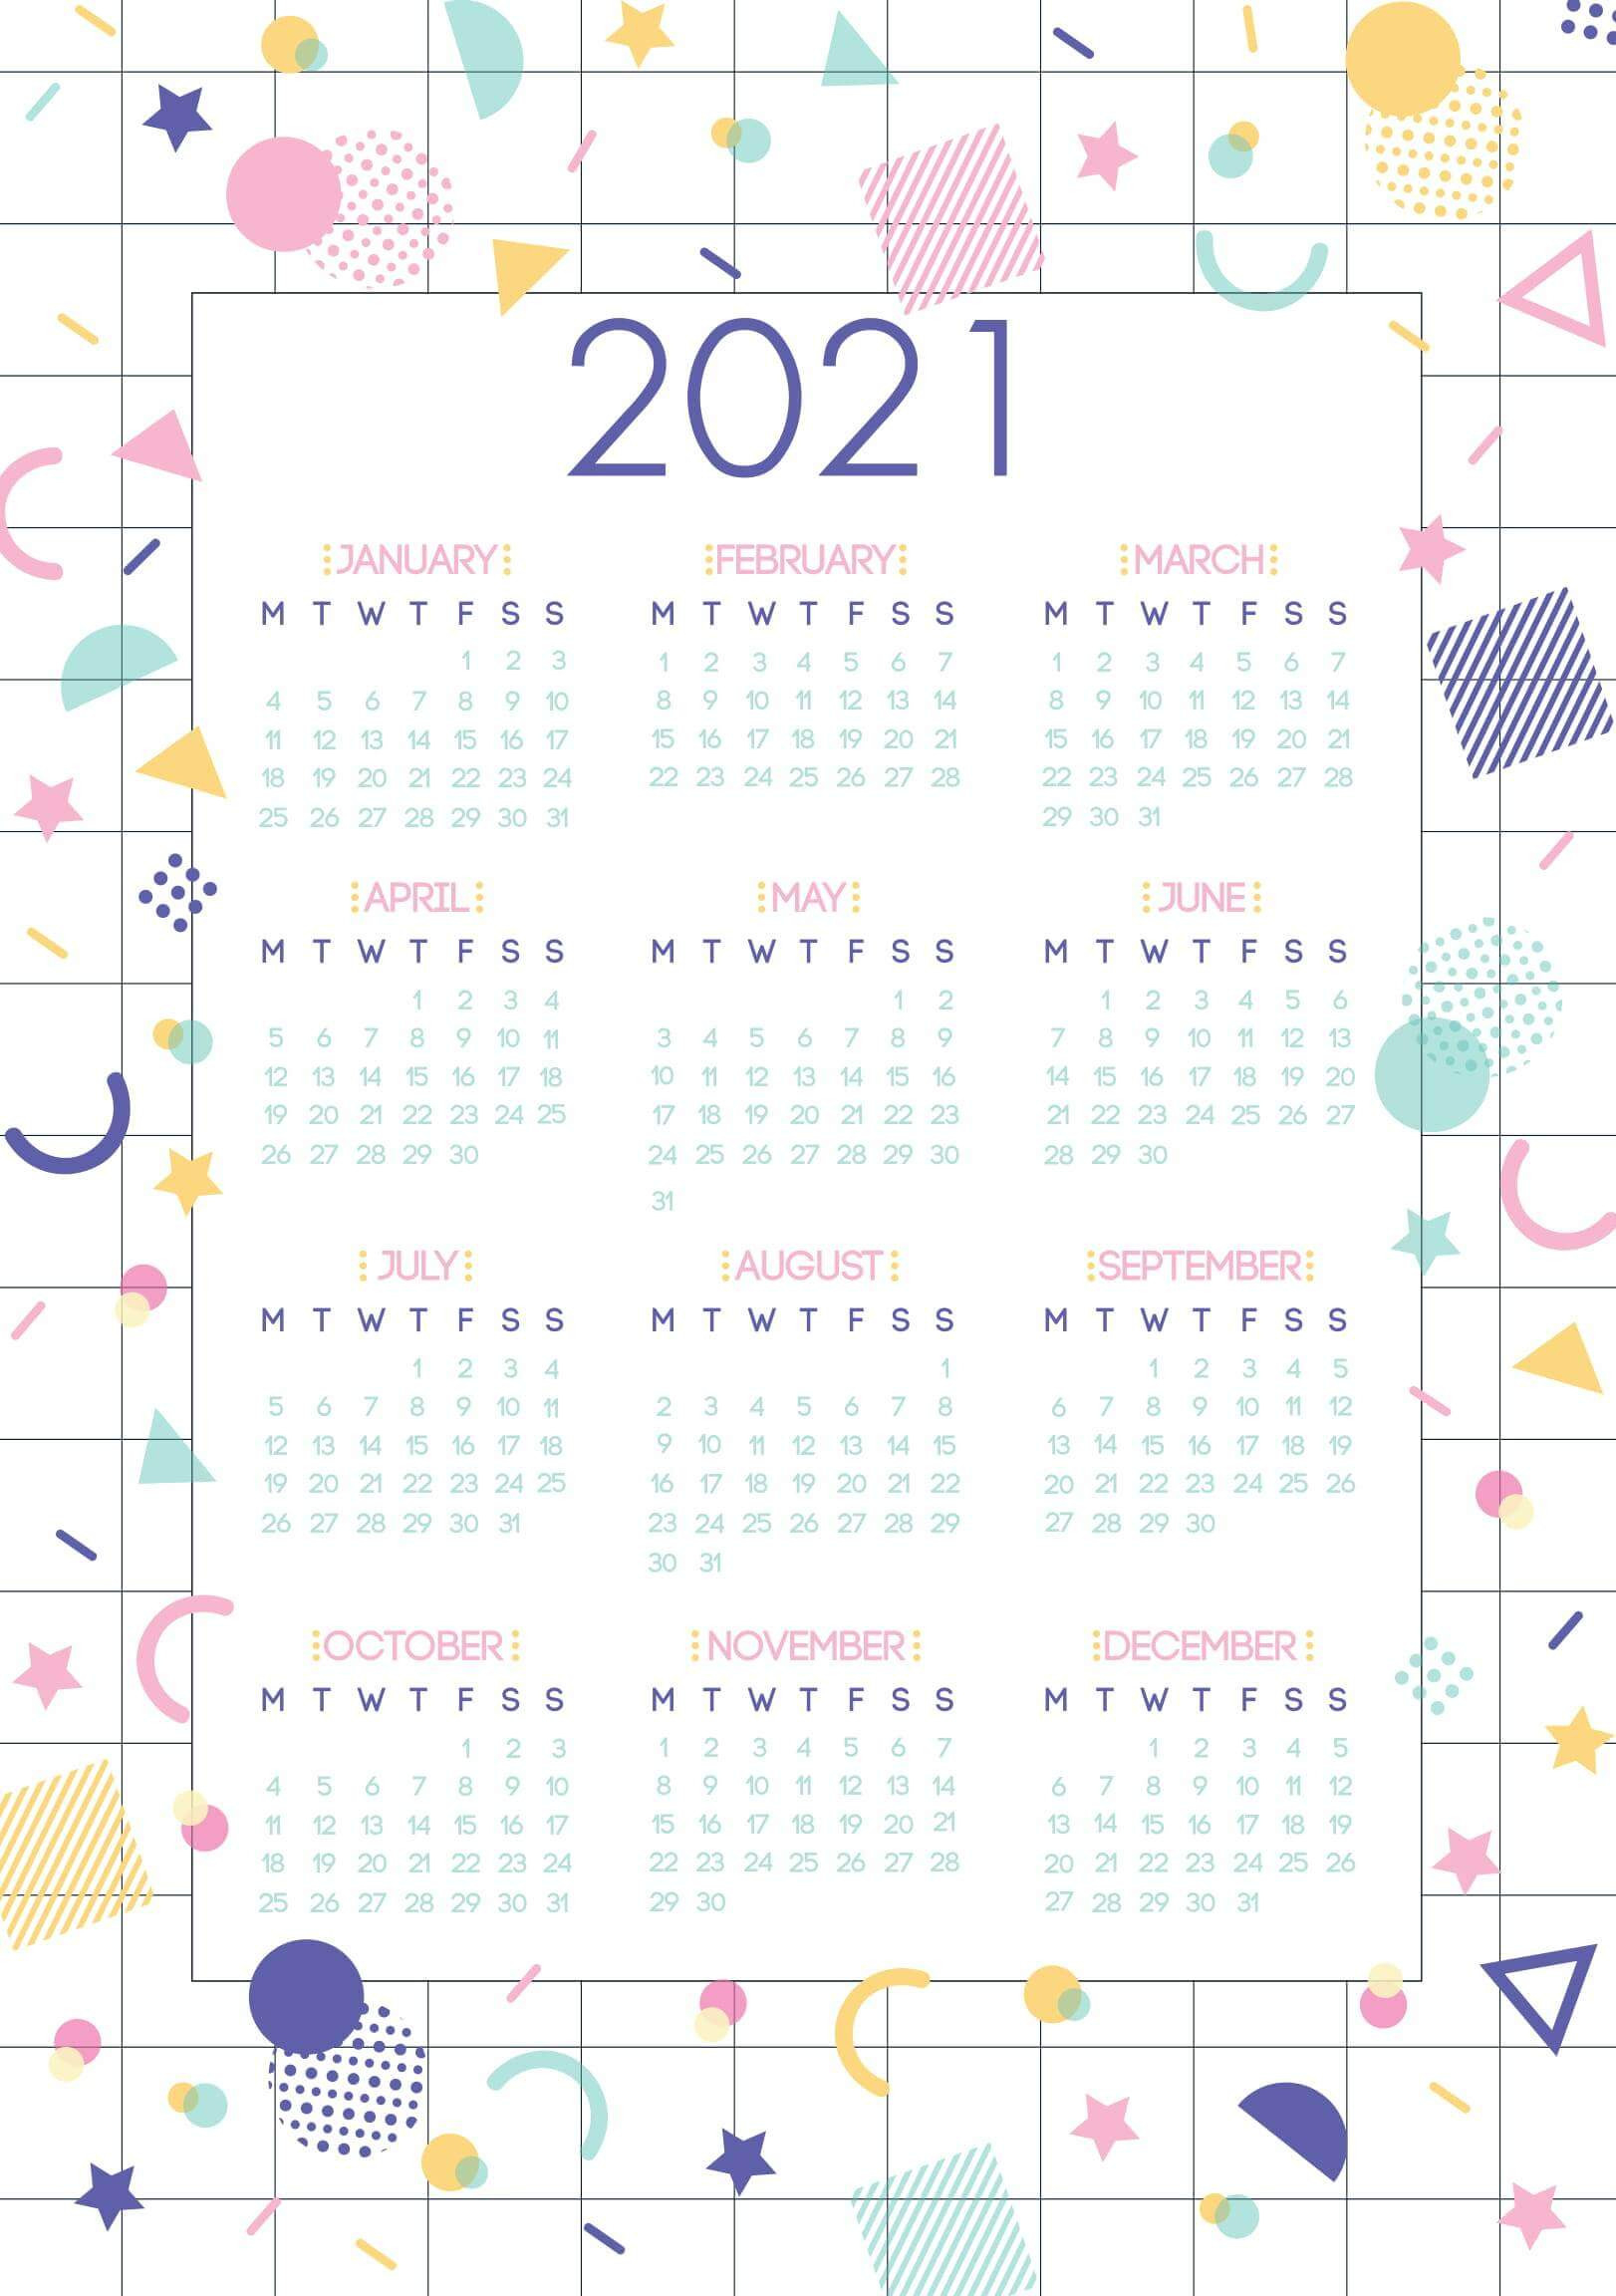 Free Yearly Calendar With Notes 2021 Template - One  2021 Yearly Calendar Printable Free With Notes